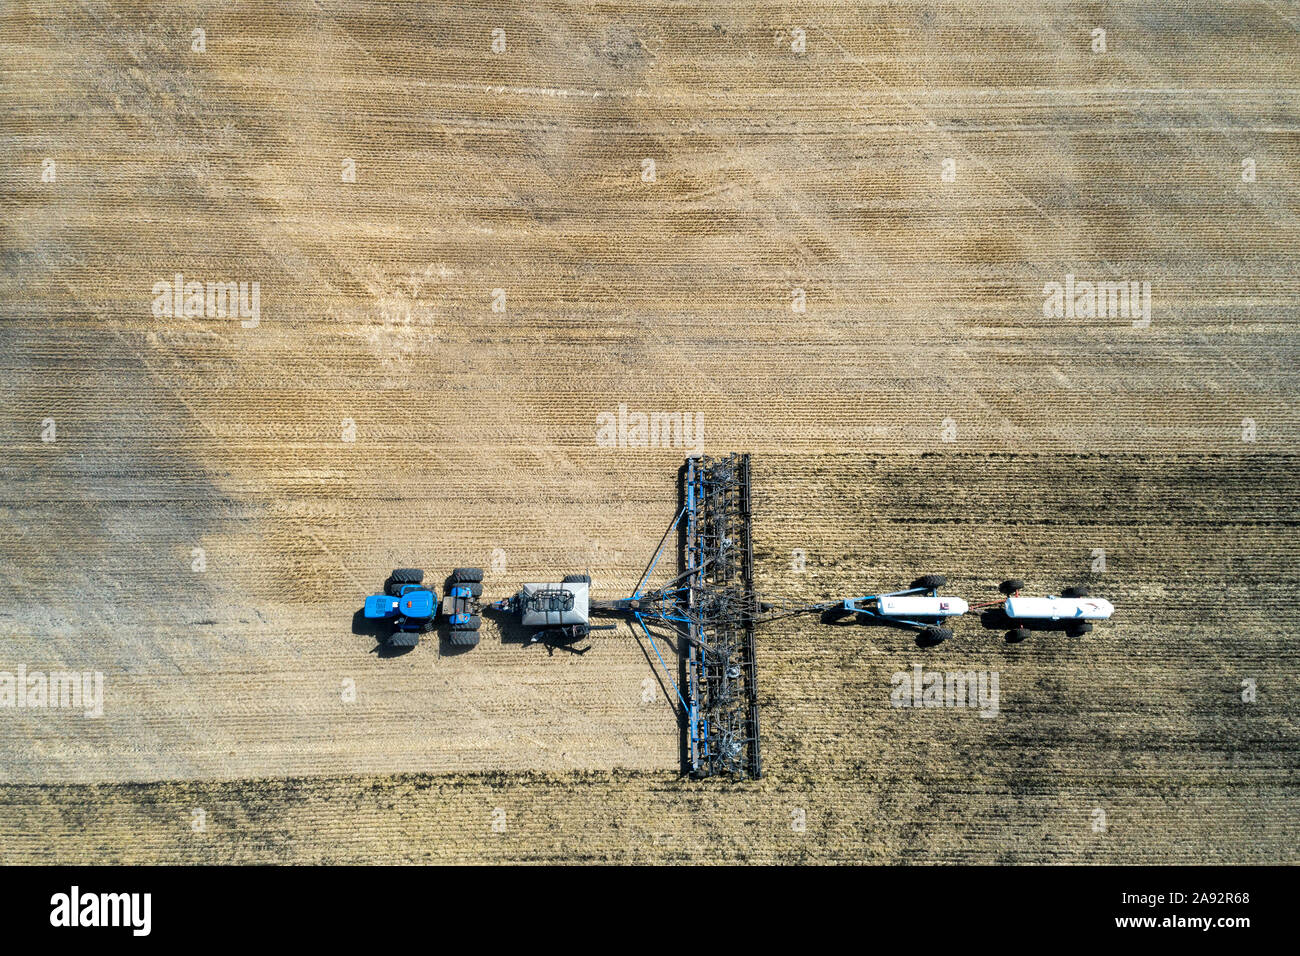 Aerial view of air seeder in field with white ammonia tanks, near Beiseker; Alberta, Canada Stock Photo